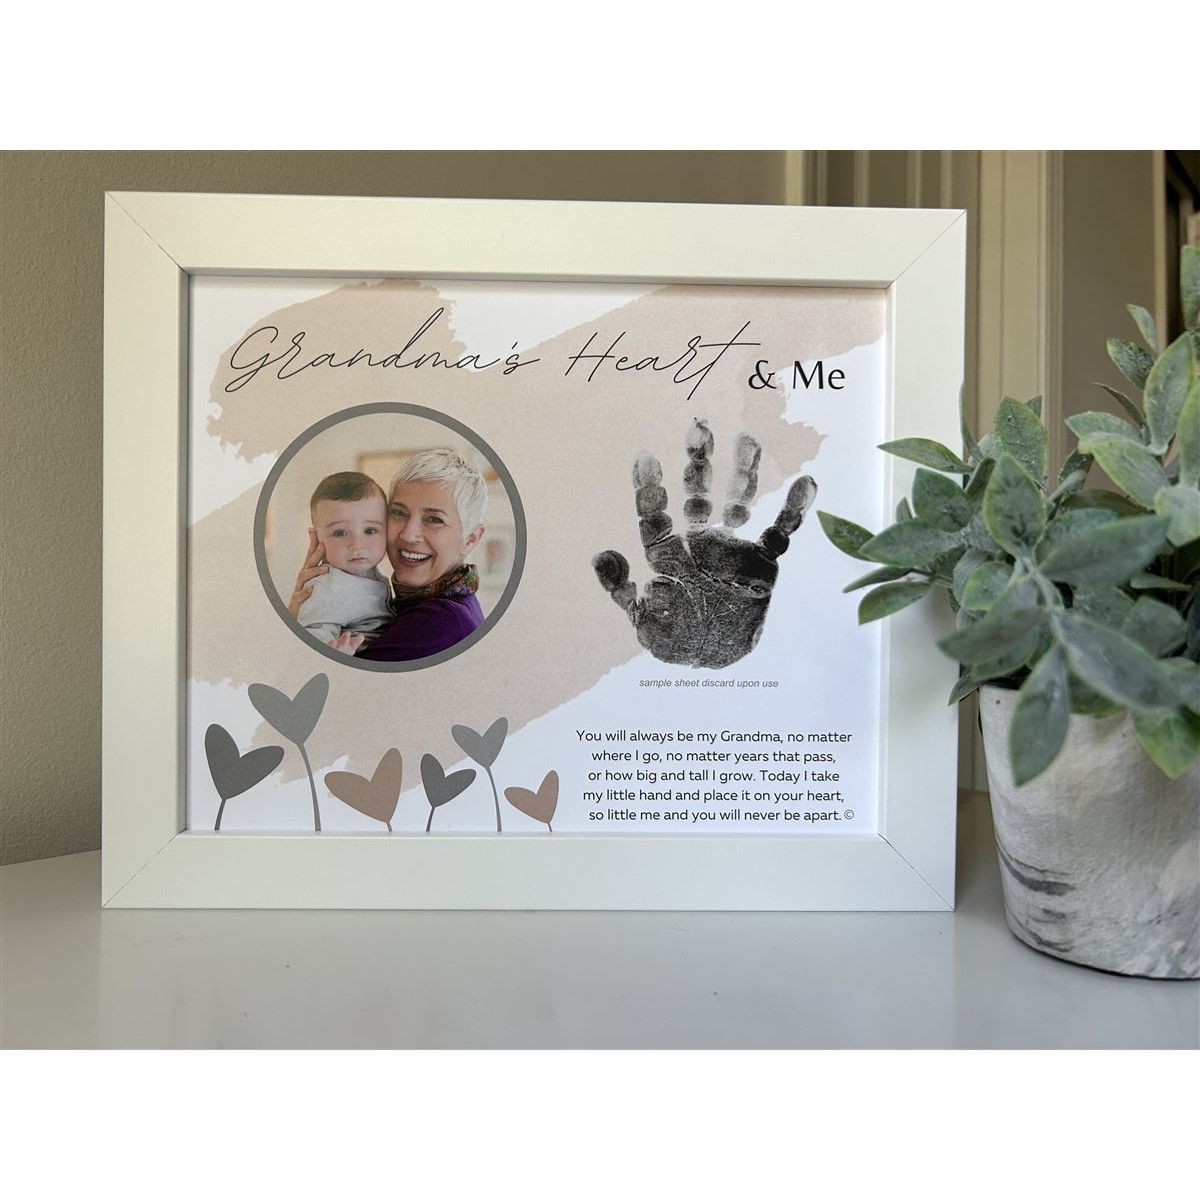 8x10 white frame with &quot;Grandma&#39;s Heart &amp; Me&quot; artwork with poem, space for a handprint, and a circular opening for a photograph.